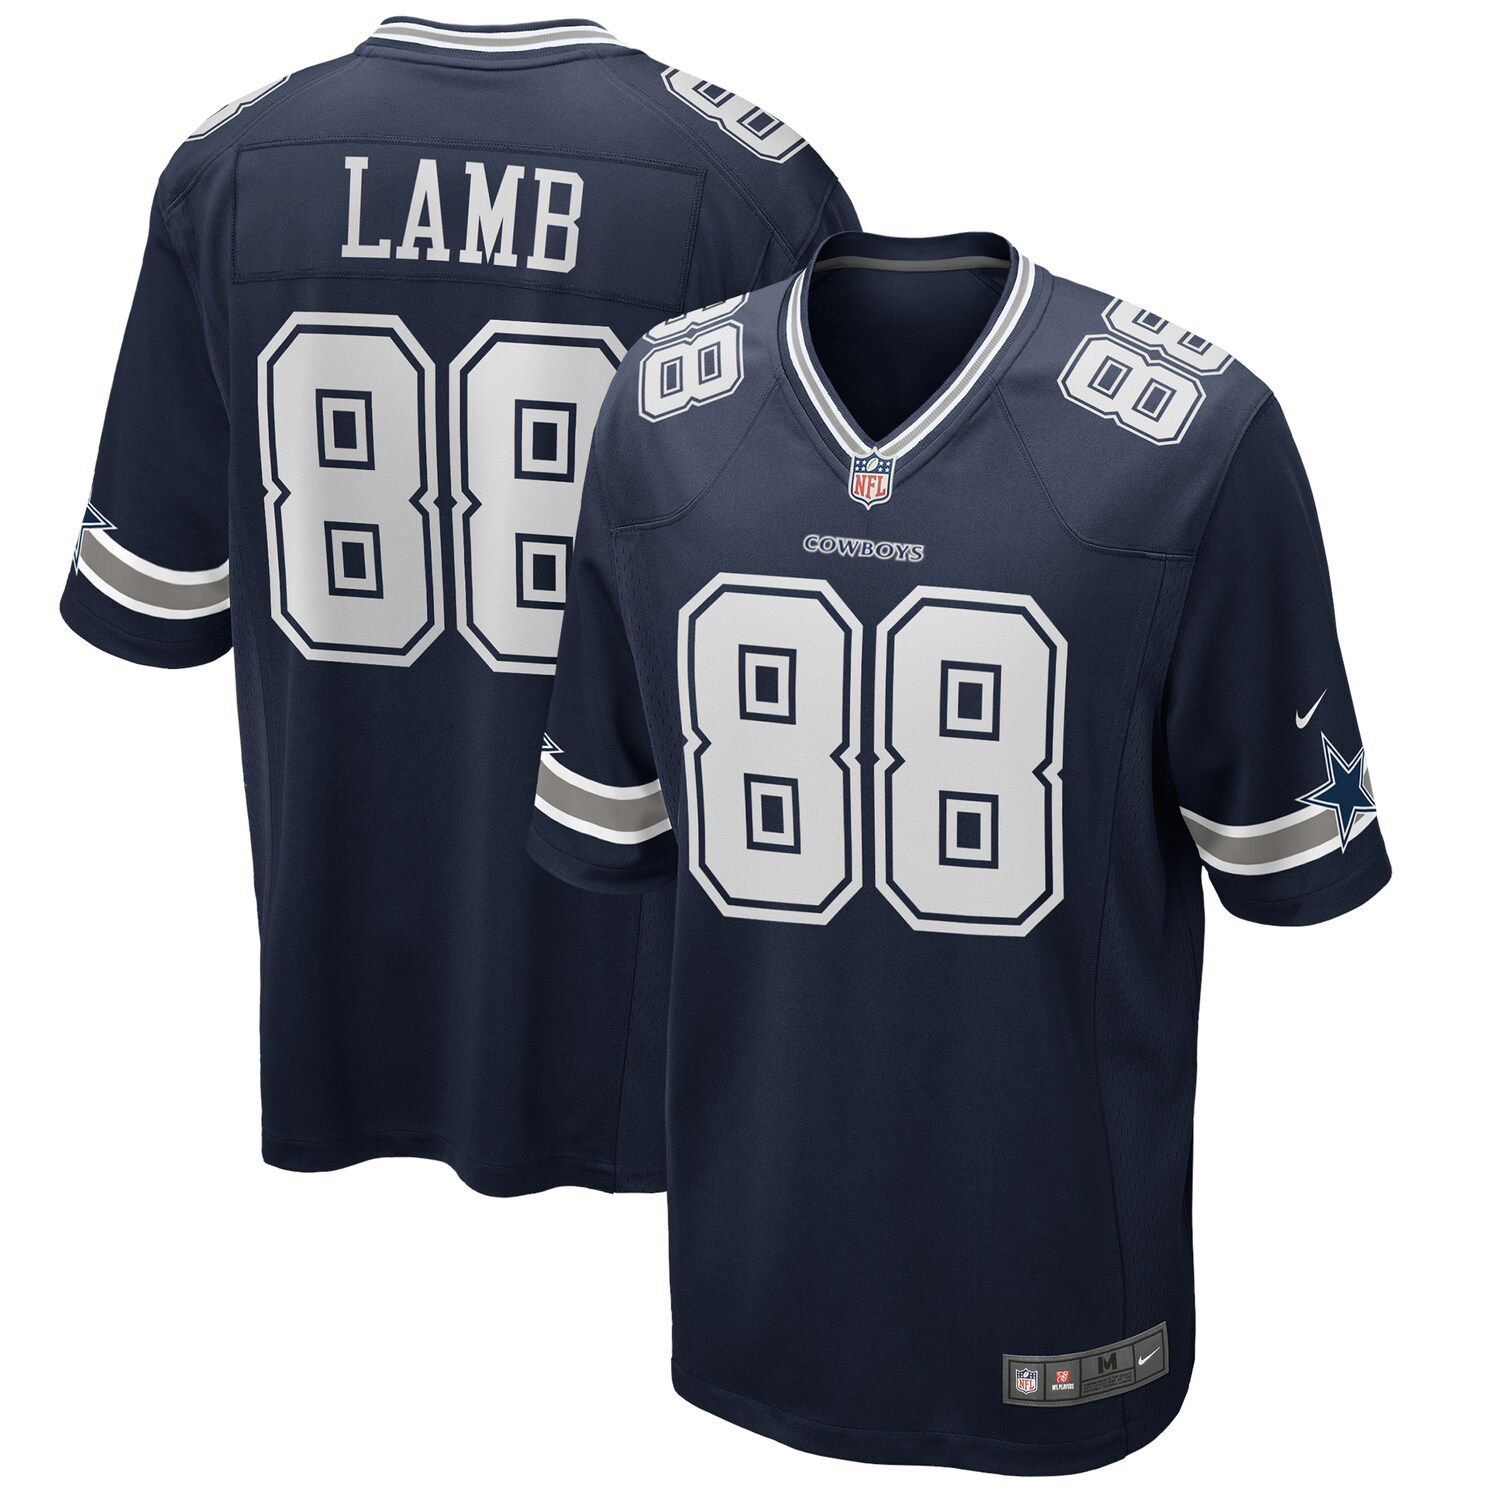 demarcus lawrence nike jersey